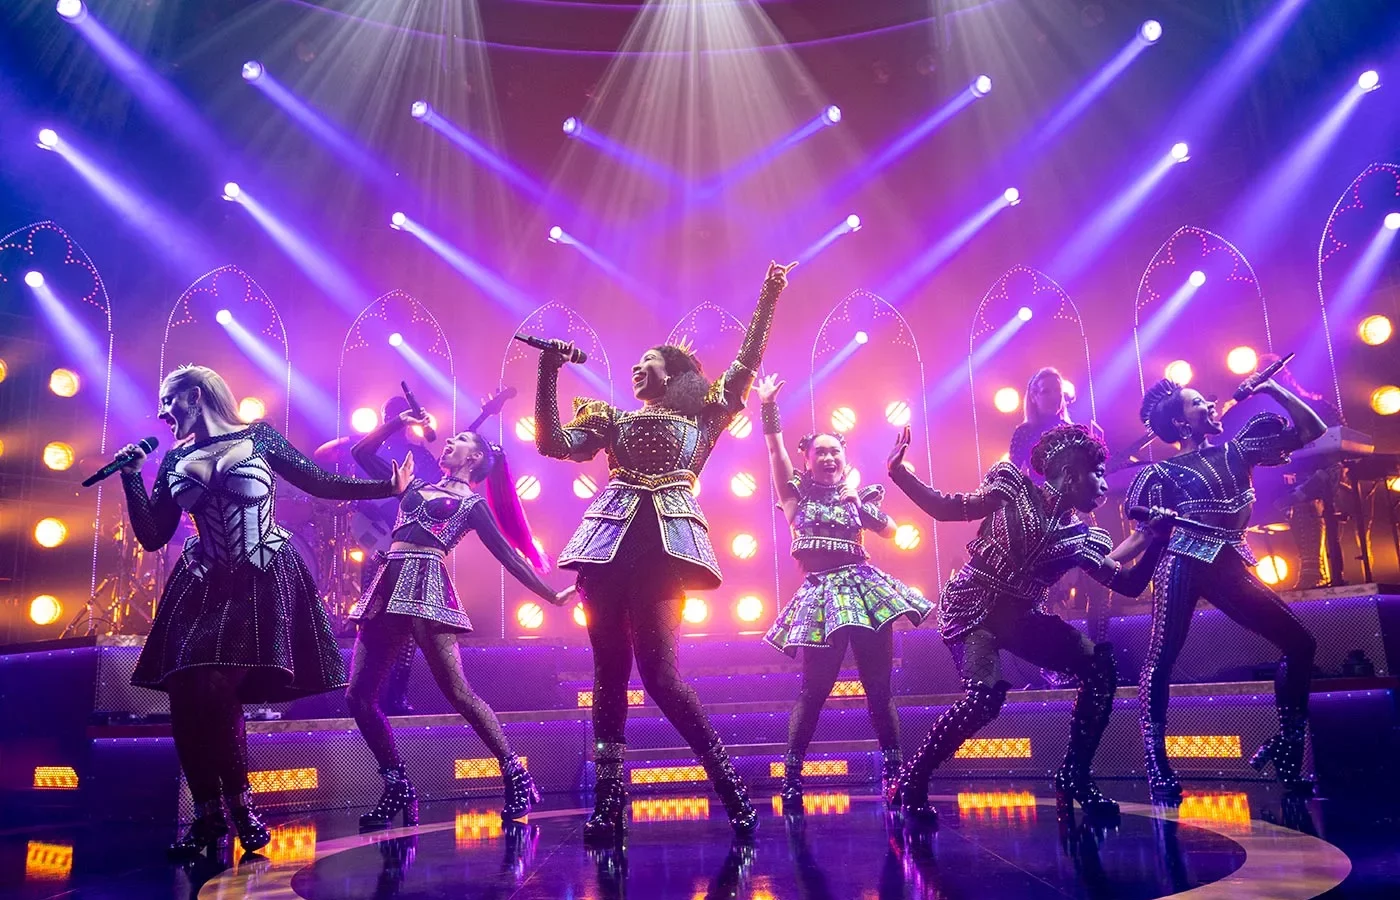 Six The Musical moment with 6 women singing with microphones in hand and lit with purple lighting.